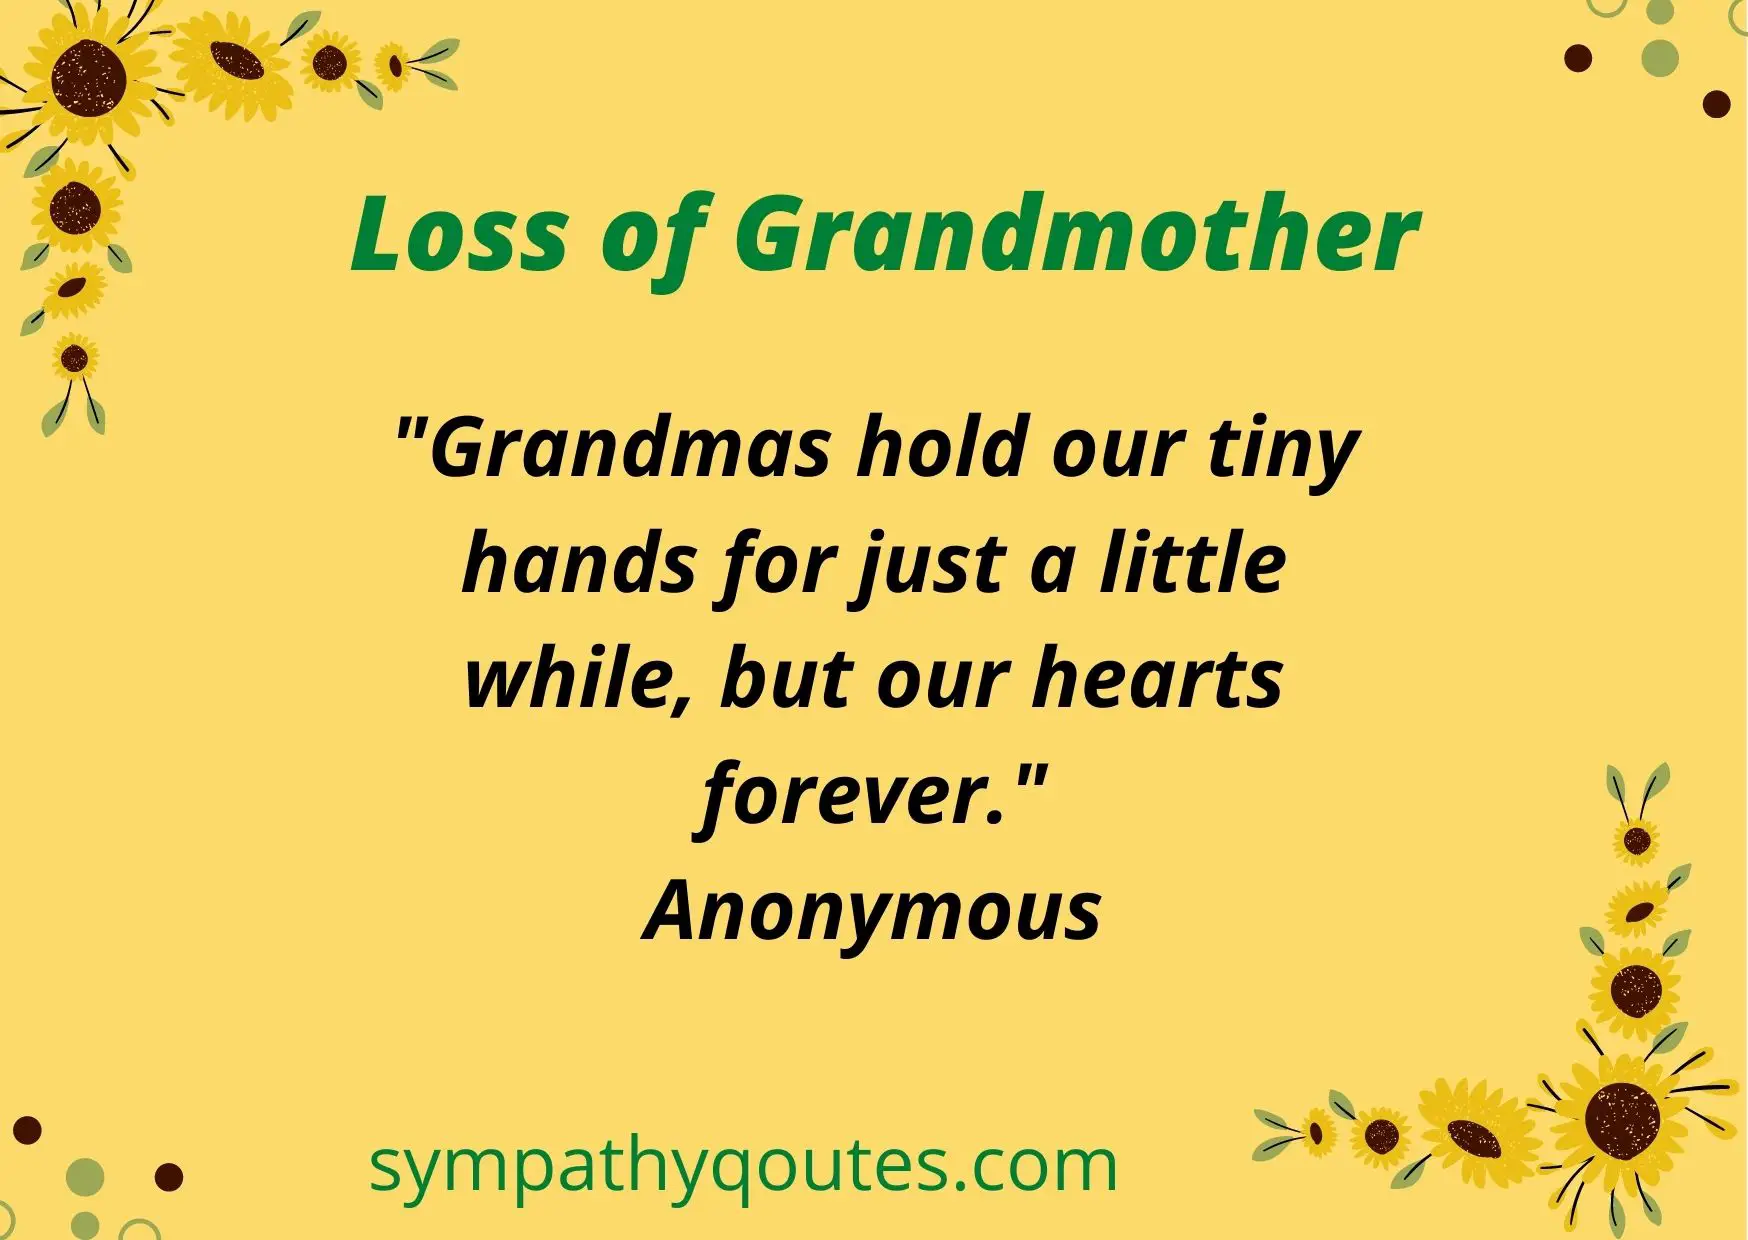 Sympathy Quotes for Loss of Grandmother